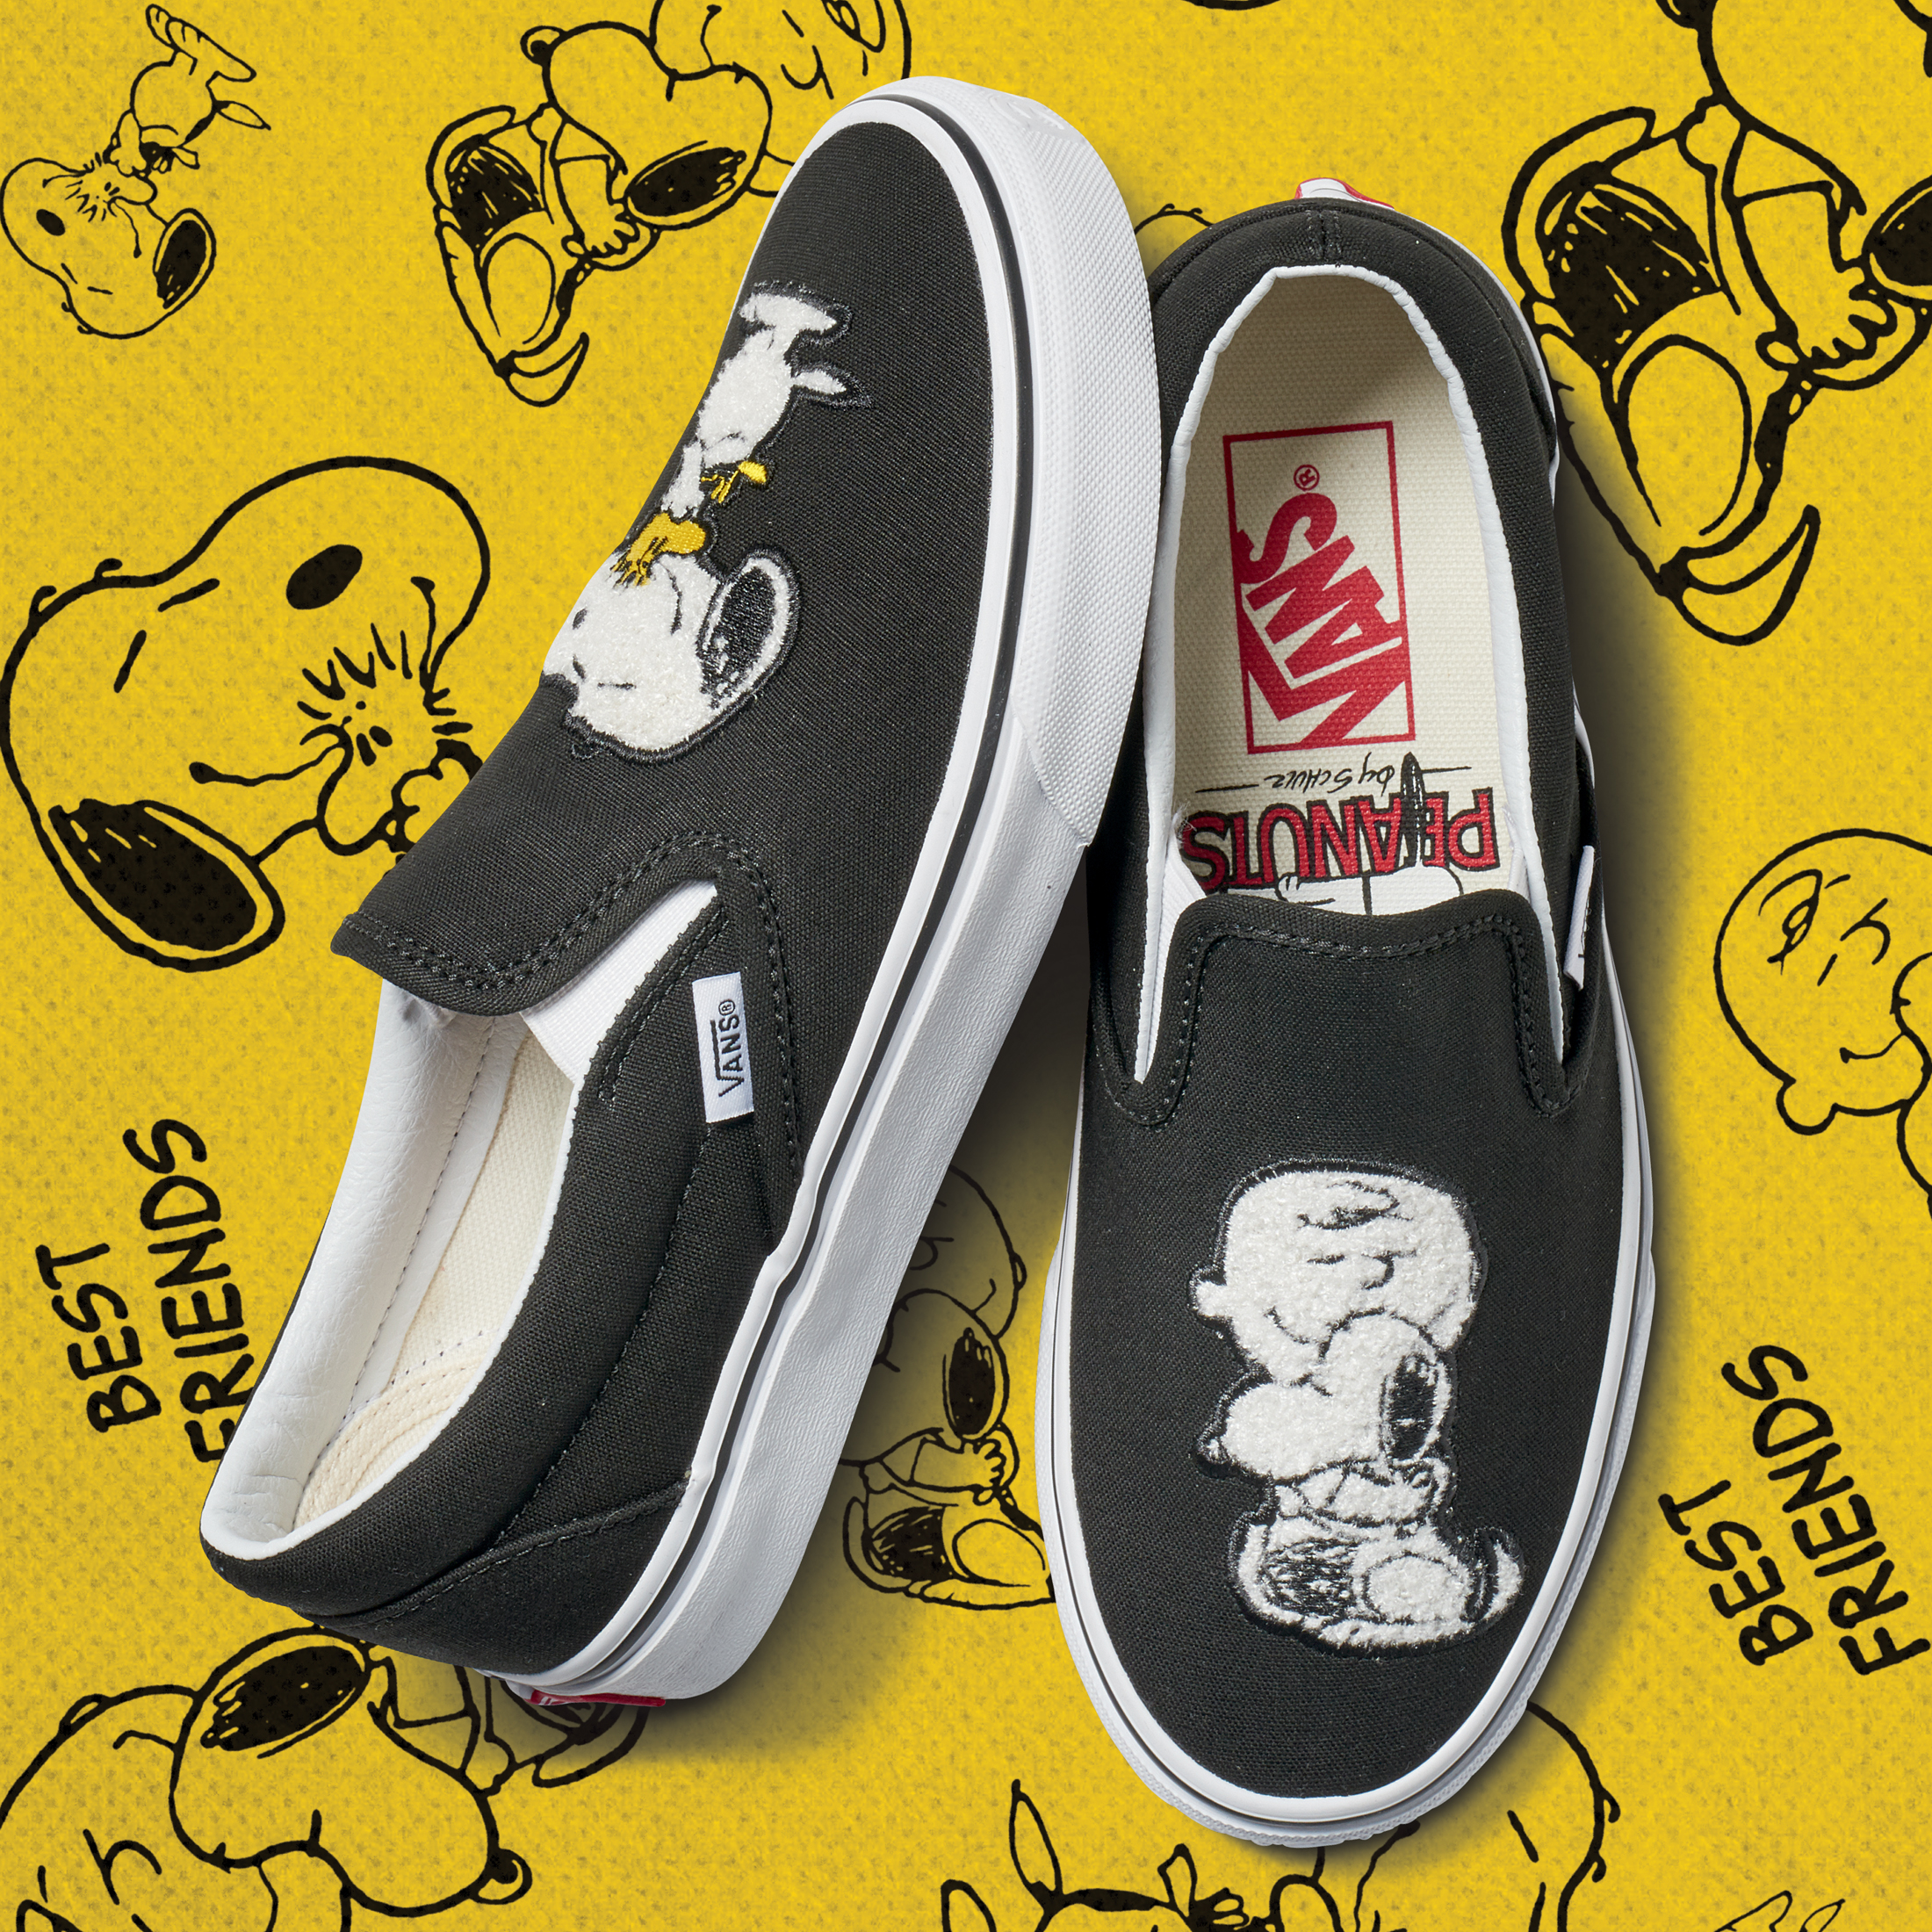 vans new peanuts collection